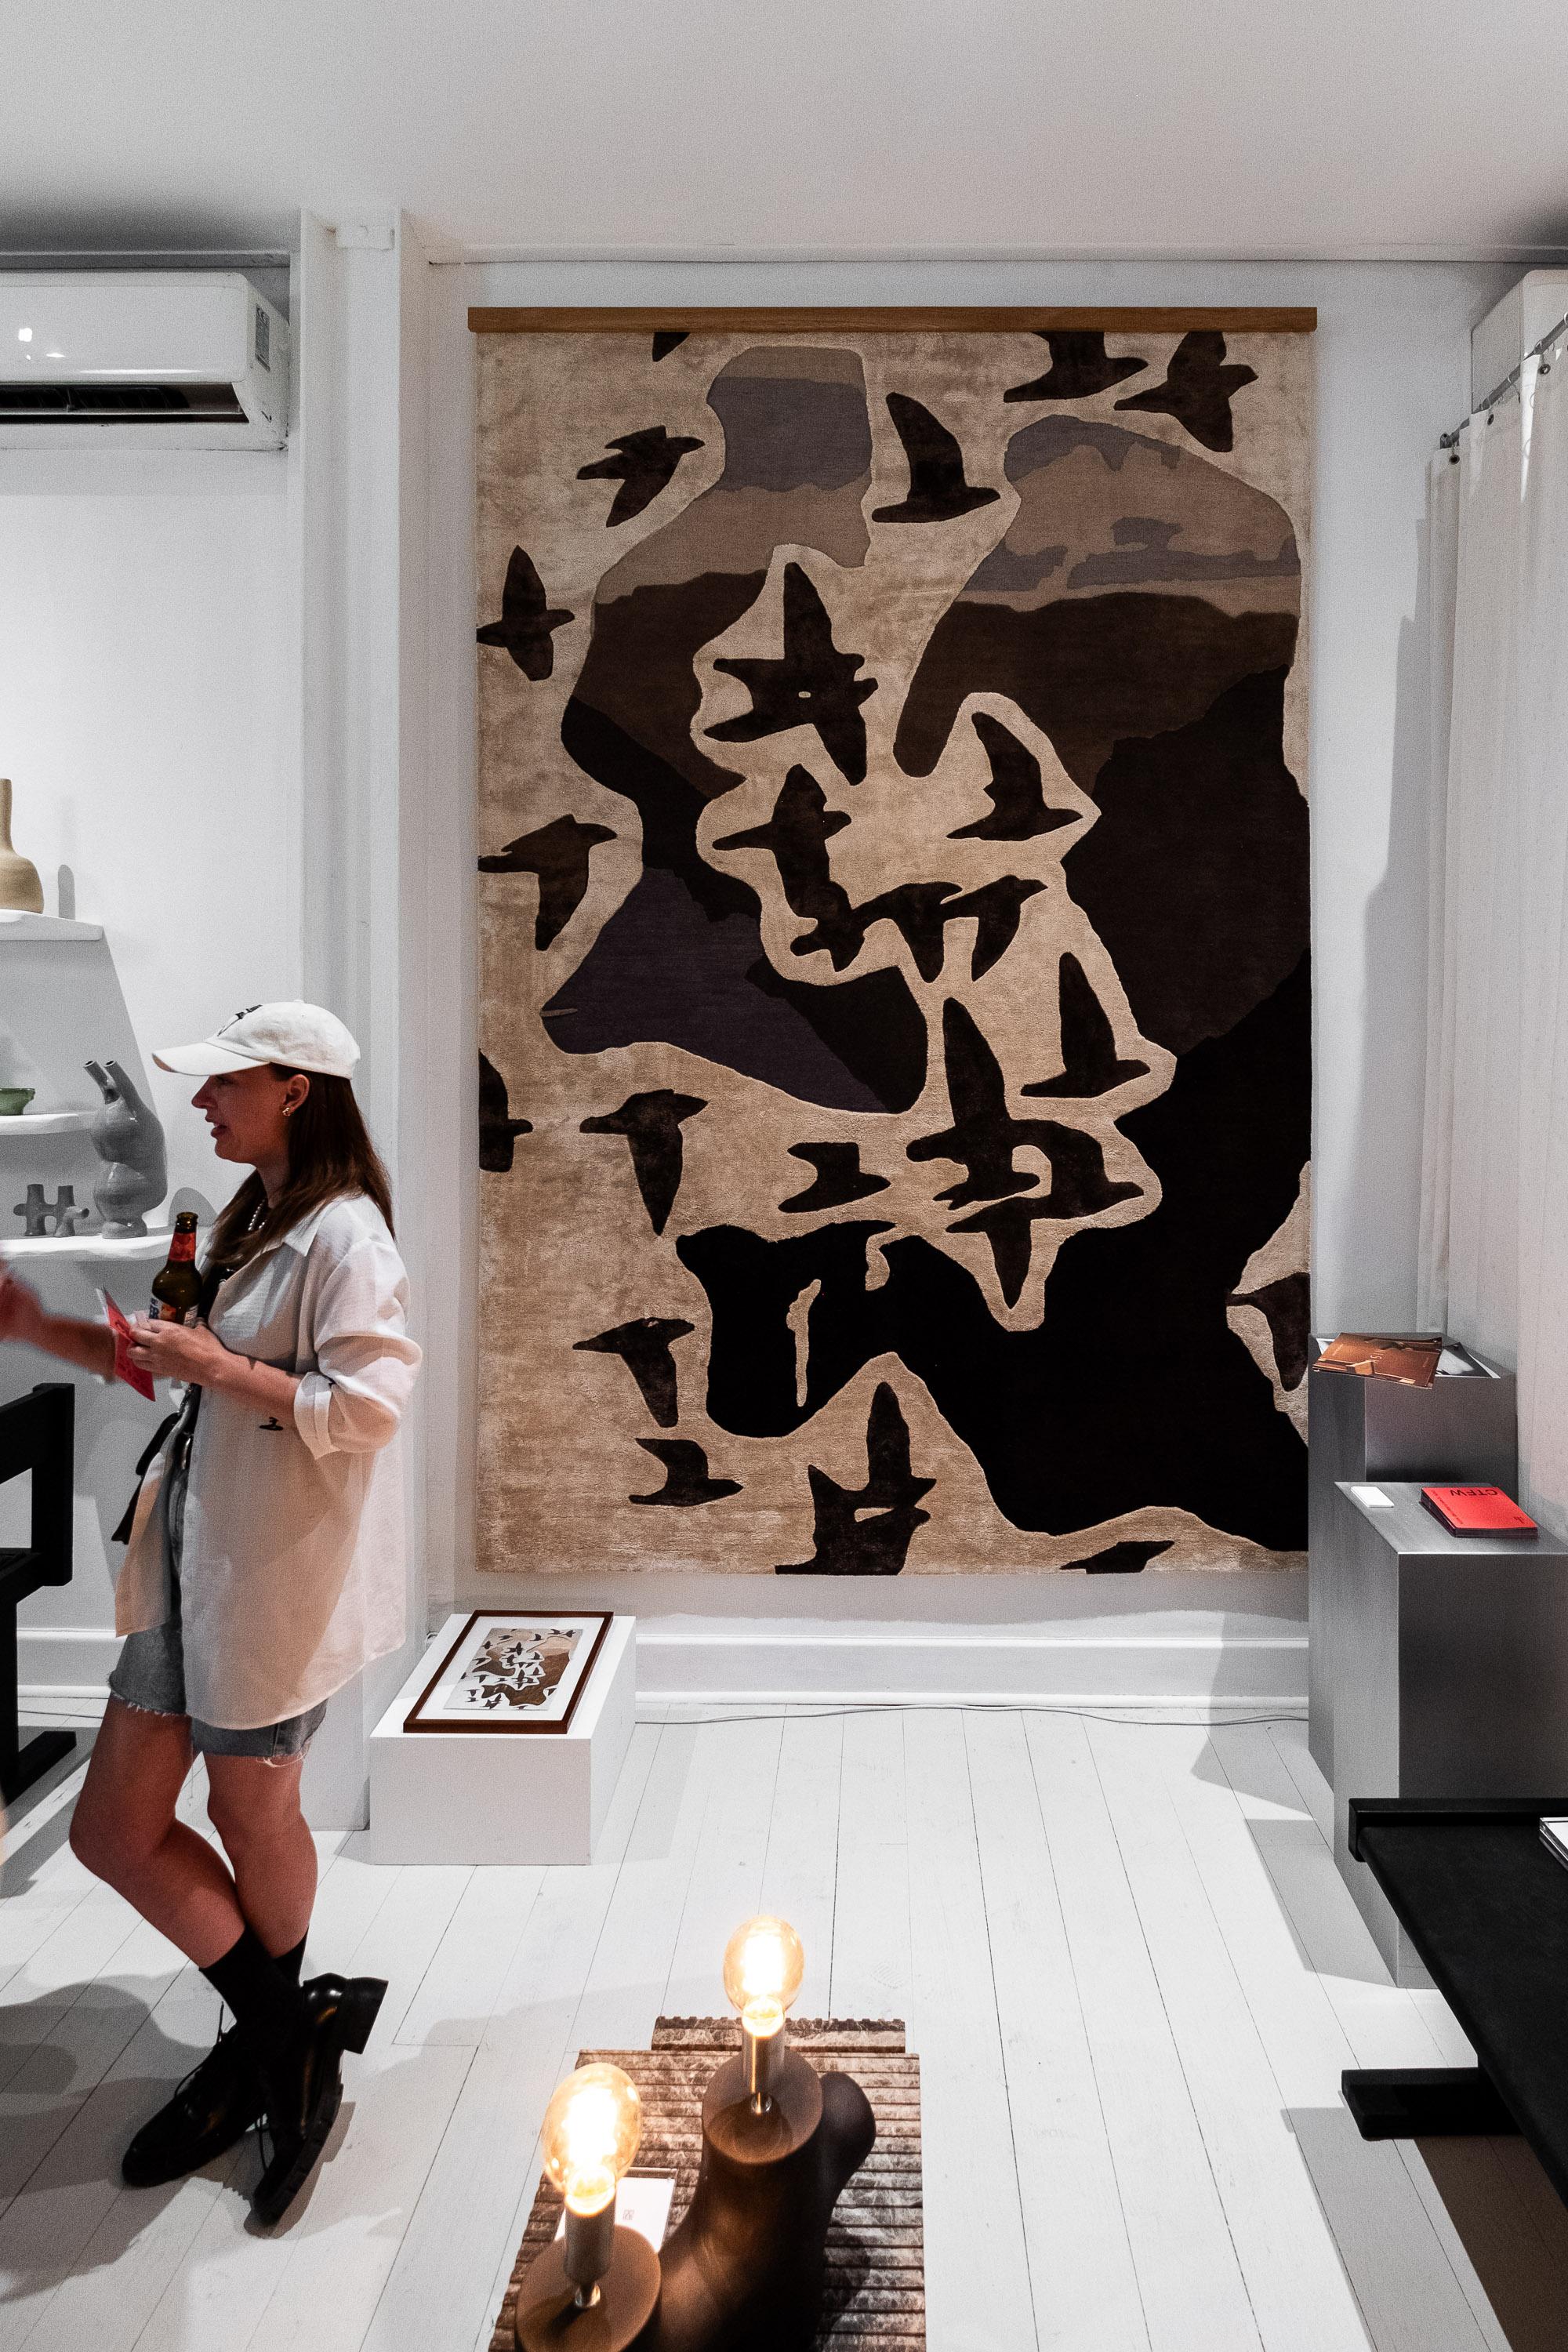 Bjorn Rug by Nish Studio
Dimensions: W 200 x L 300 cm
Materials: Nu silk and Wool


N I S H is a Cape Town based Fashion and Furniture design studio. N I S H creates contemporary, elegant and progressive designs that salute the contradiction between